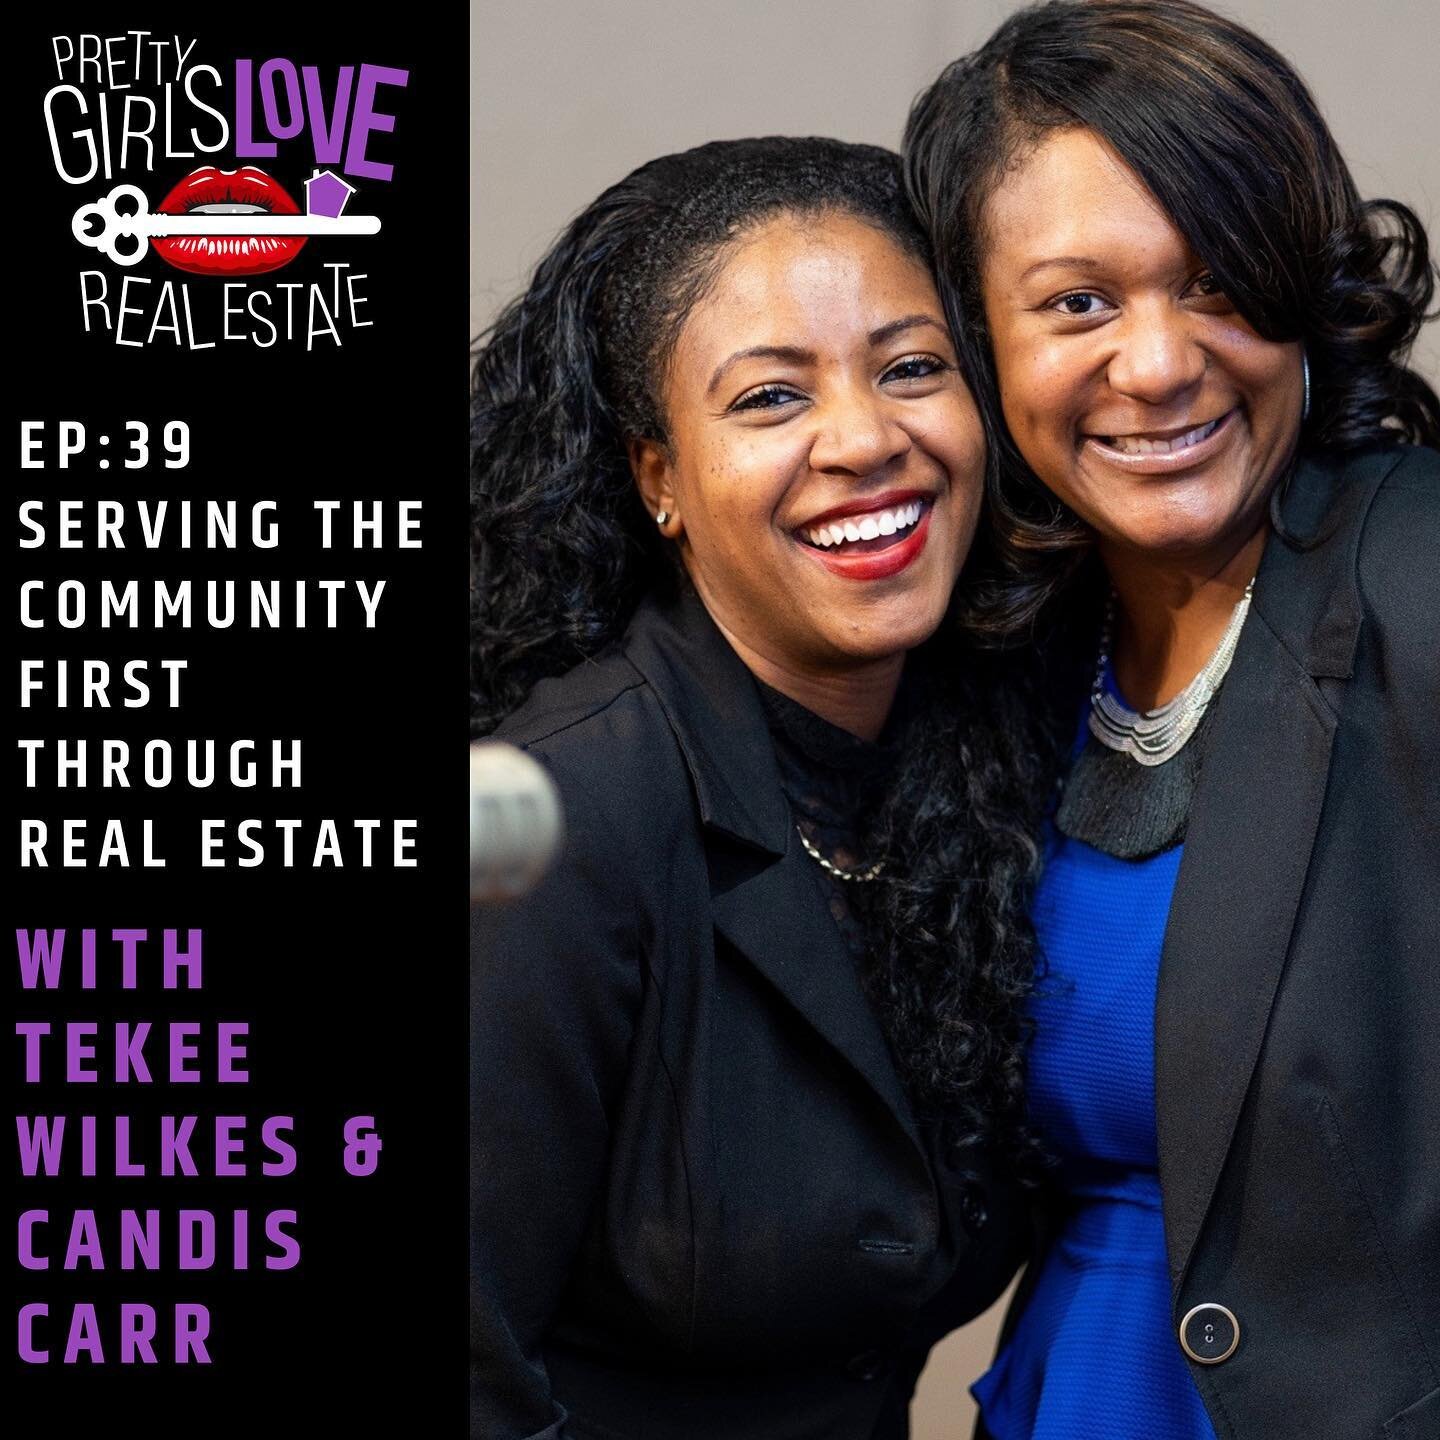 On episode 39 of @prettygirlsloverealestate , I had the pleasure of getting double the knowledge and inspiration from the ladies of the Dream Team of ExecuHome Realty, @realtor_tekee and @carr_realtor. They are veteran real estate agents in the Balti